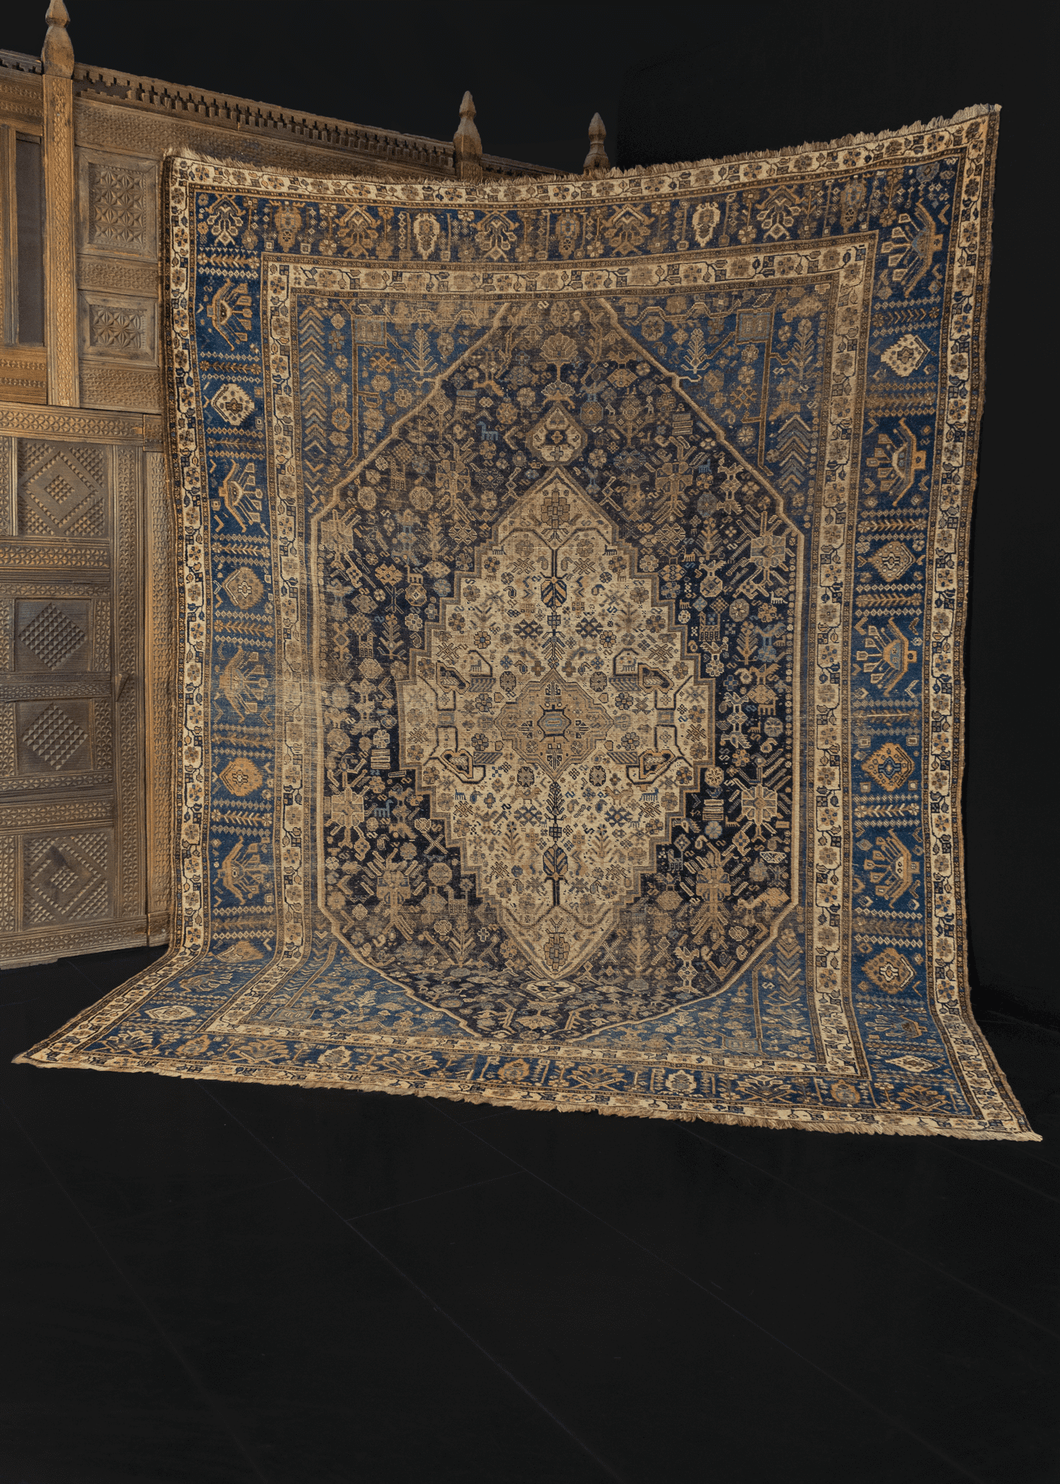 Khamseh rug from S Iran featuring a concentric diamond design with geometric shapes and symbols throughout. The color palette is composed of indigo blues and varying shades of beige. 